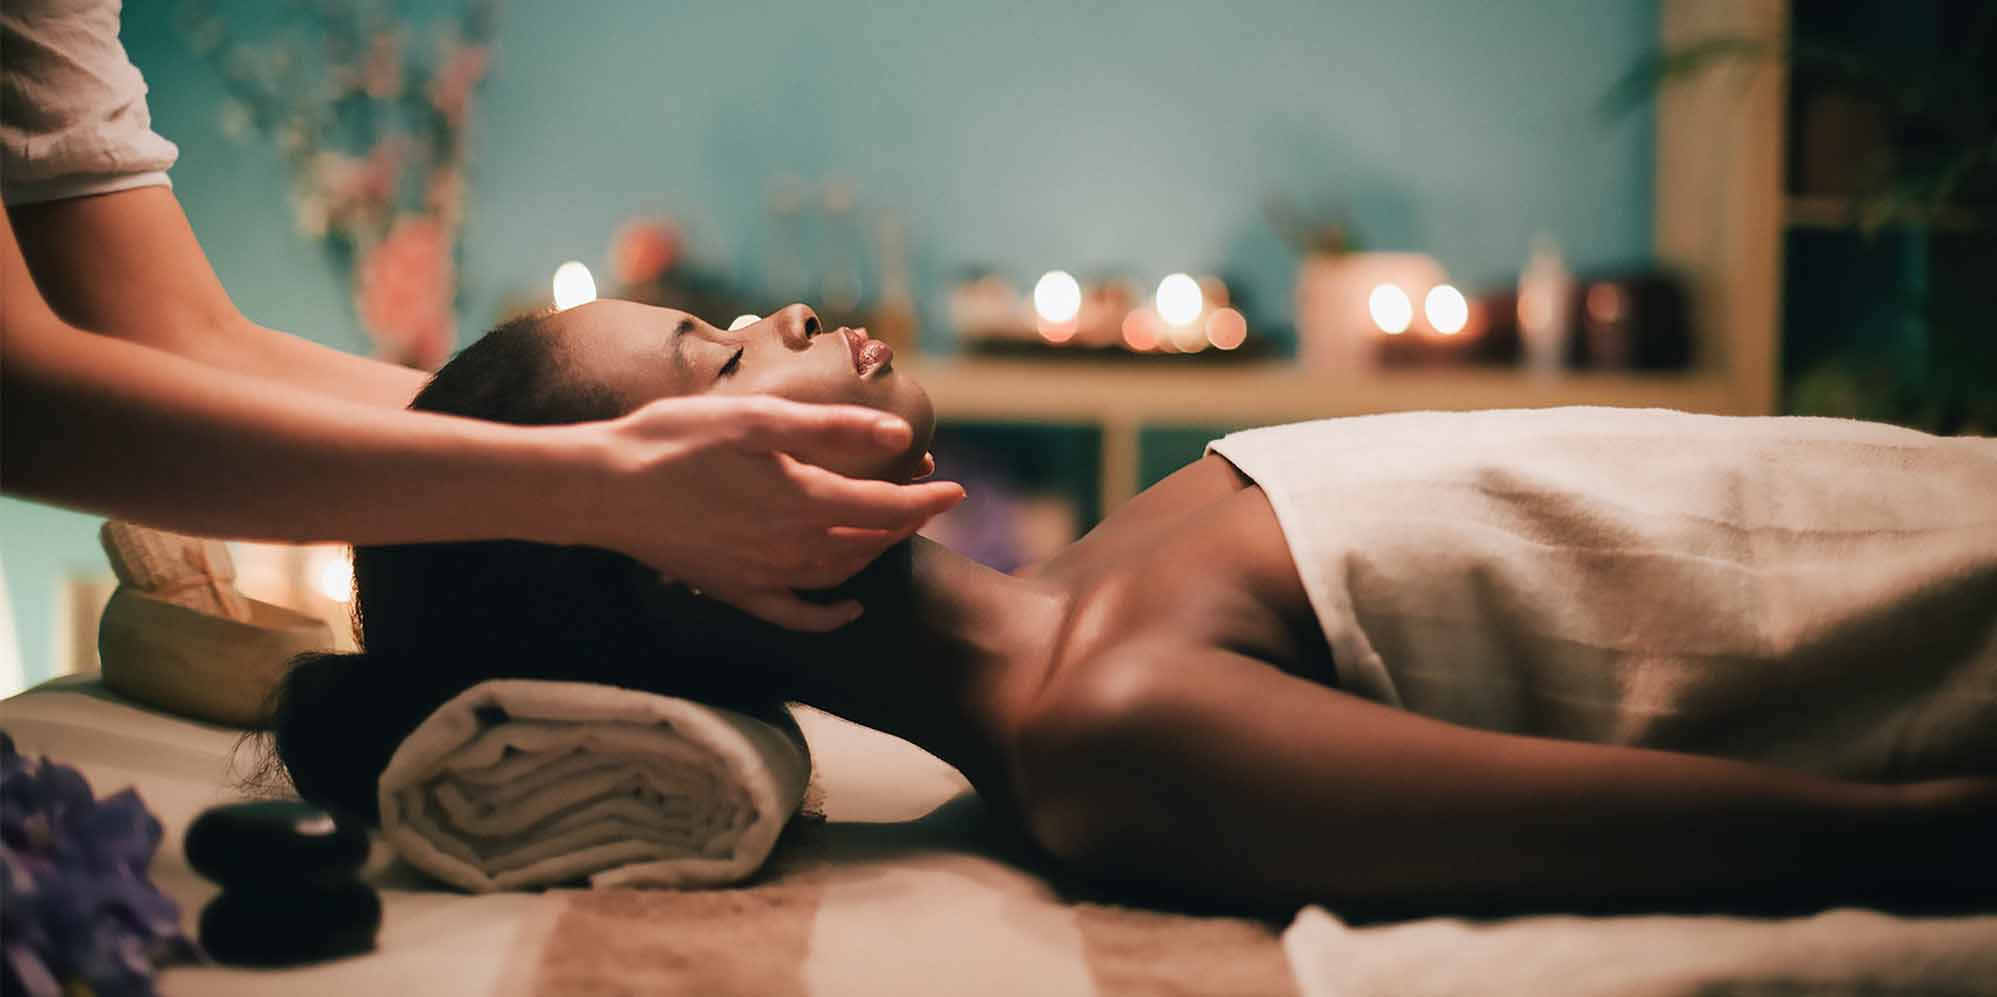 Asian Massage Services in Cleveland, OH